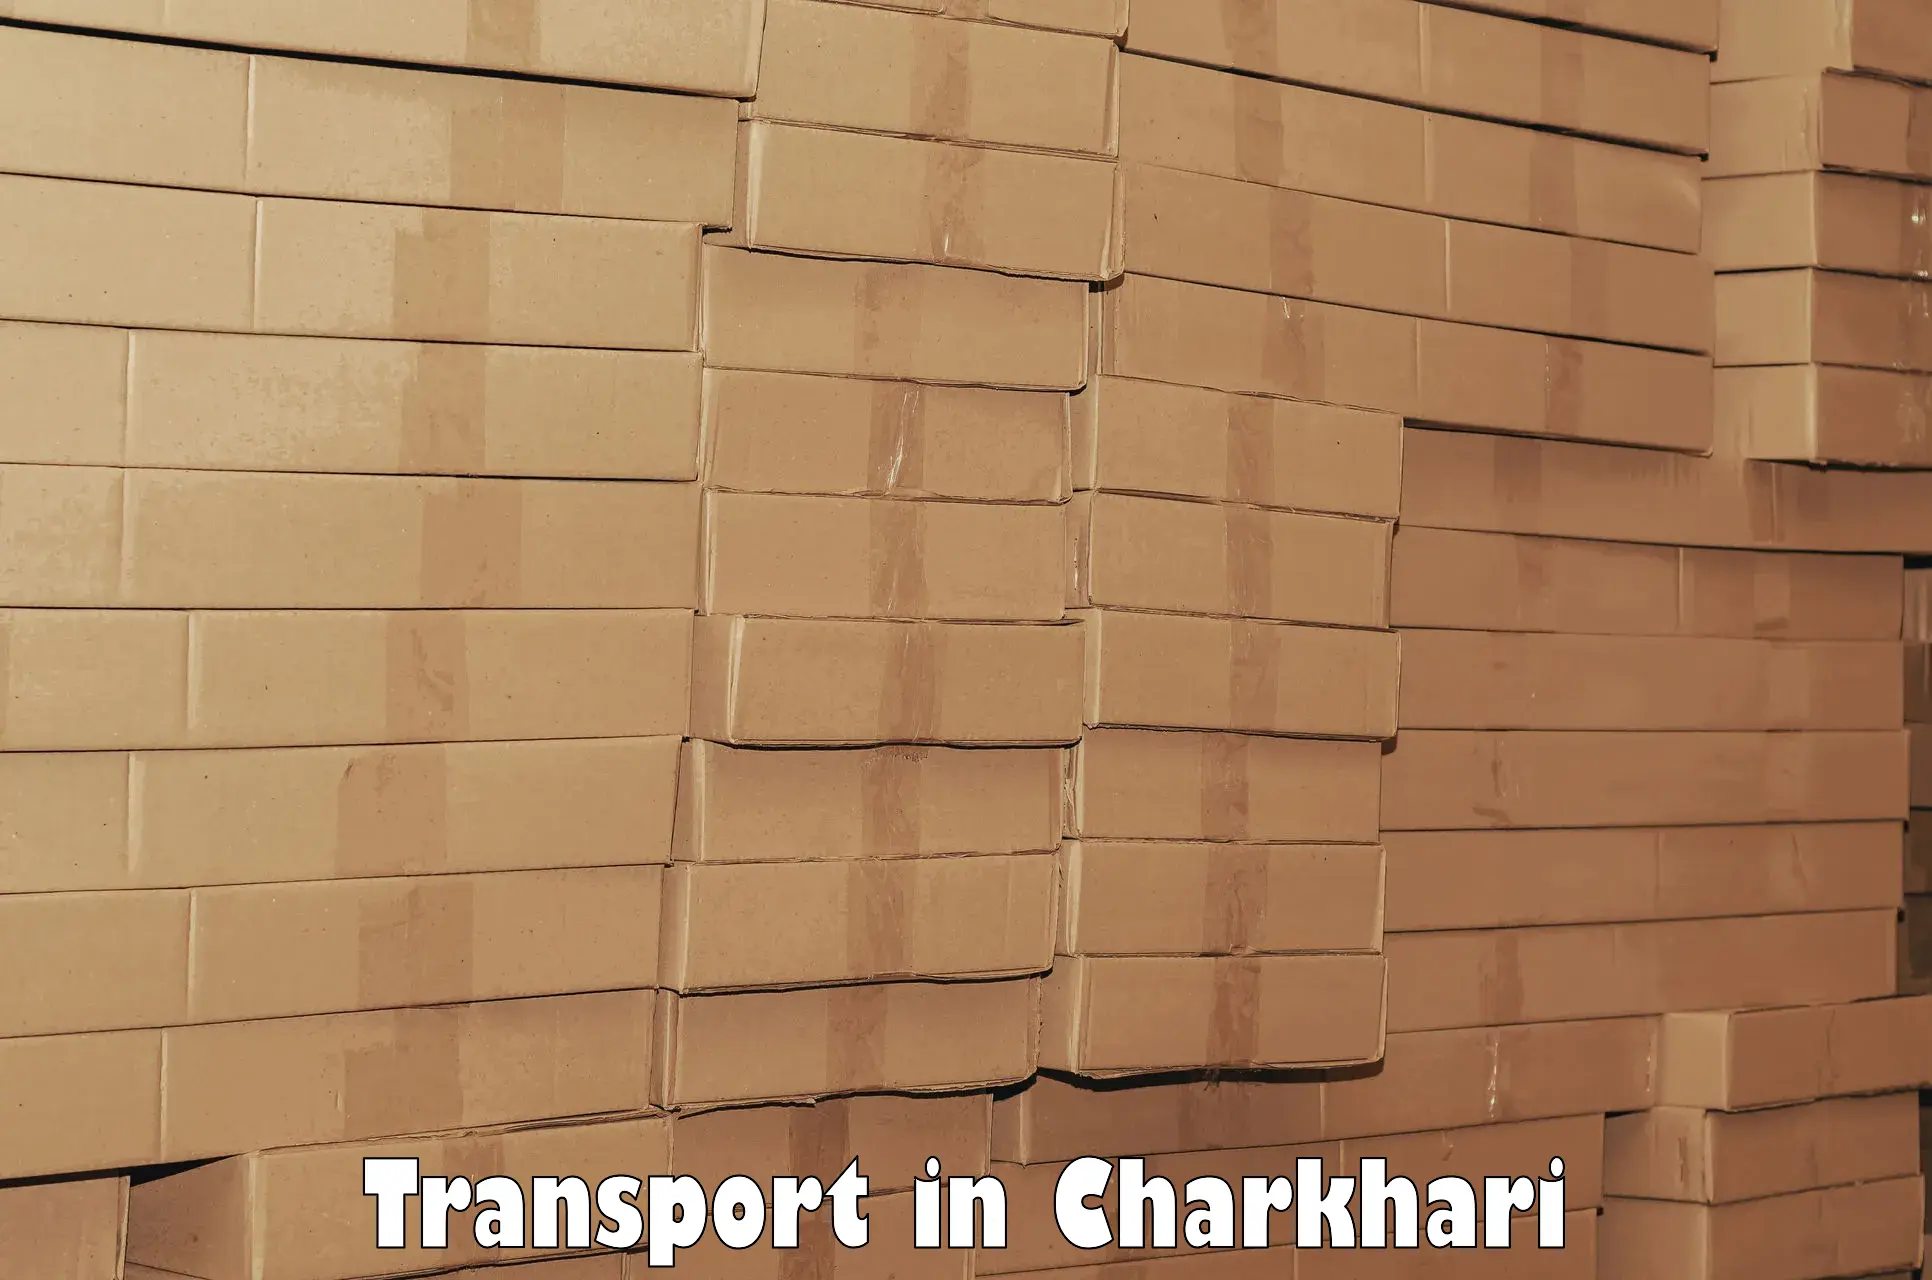 Daily parcel service transport in Charkhari